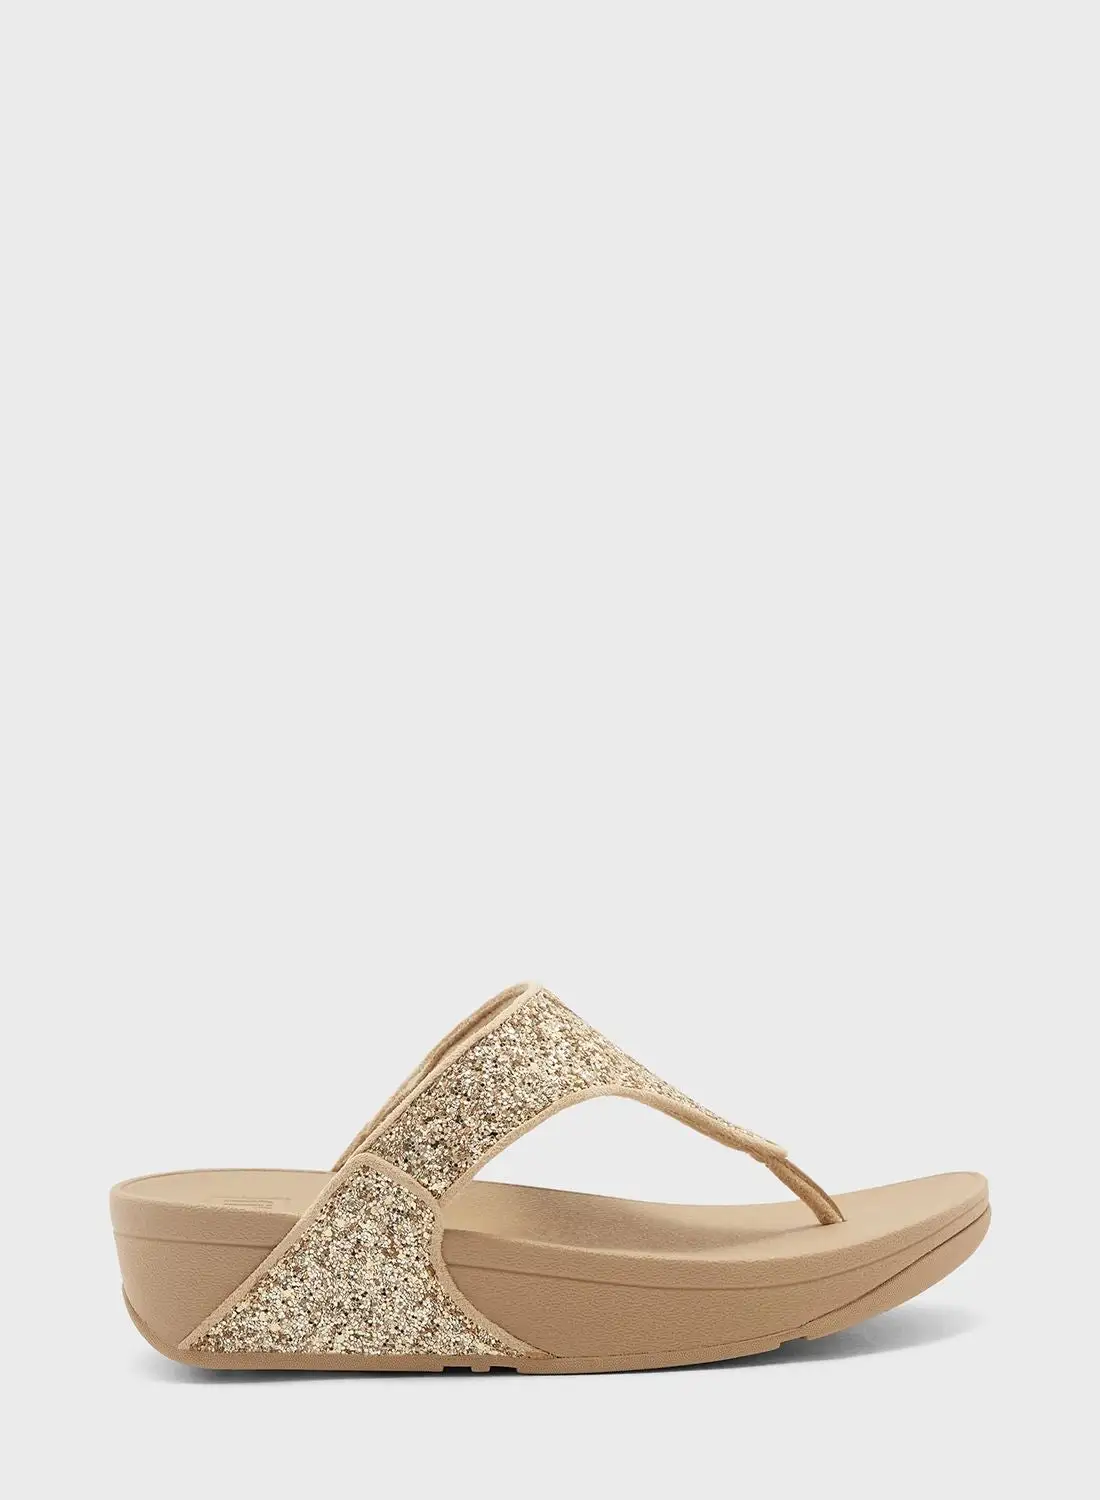 fitflop Single Strap Wedge Sandals